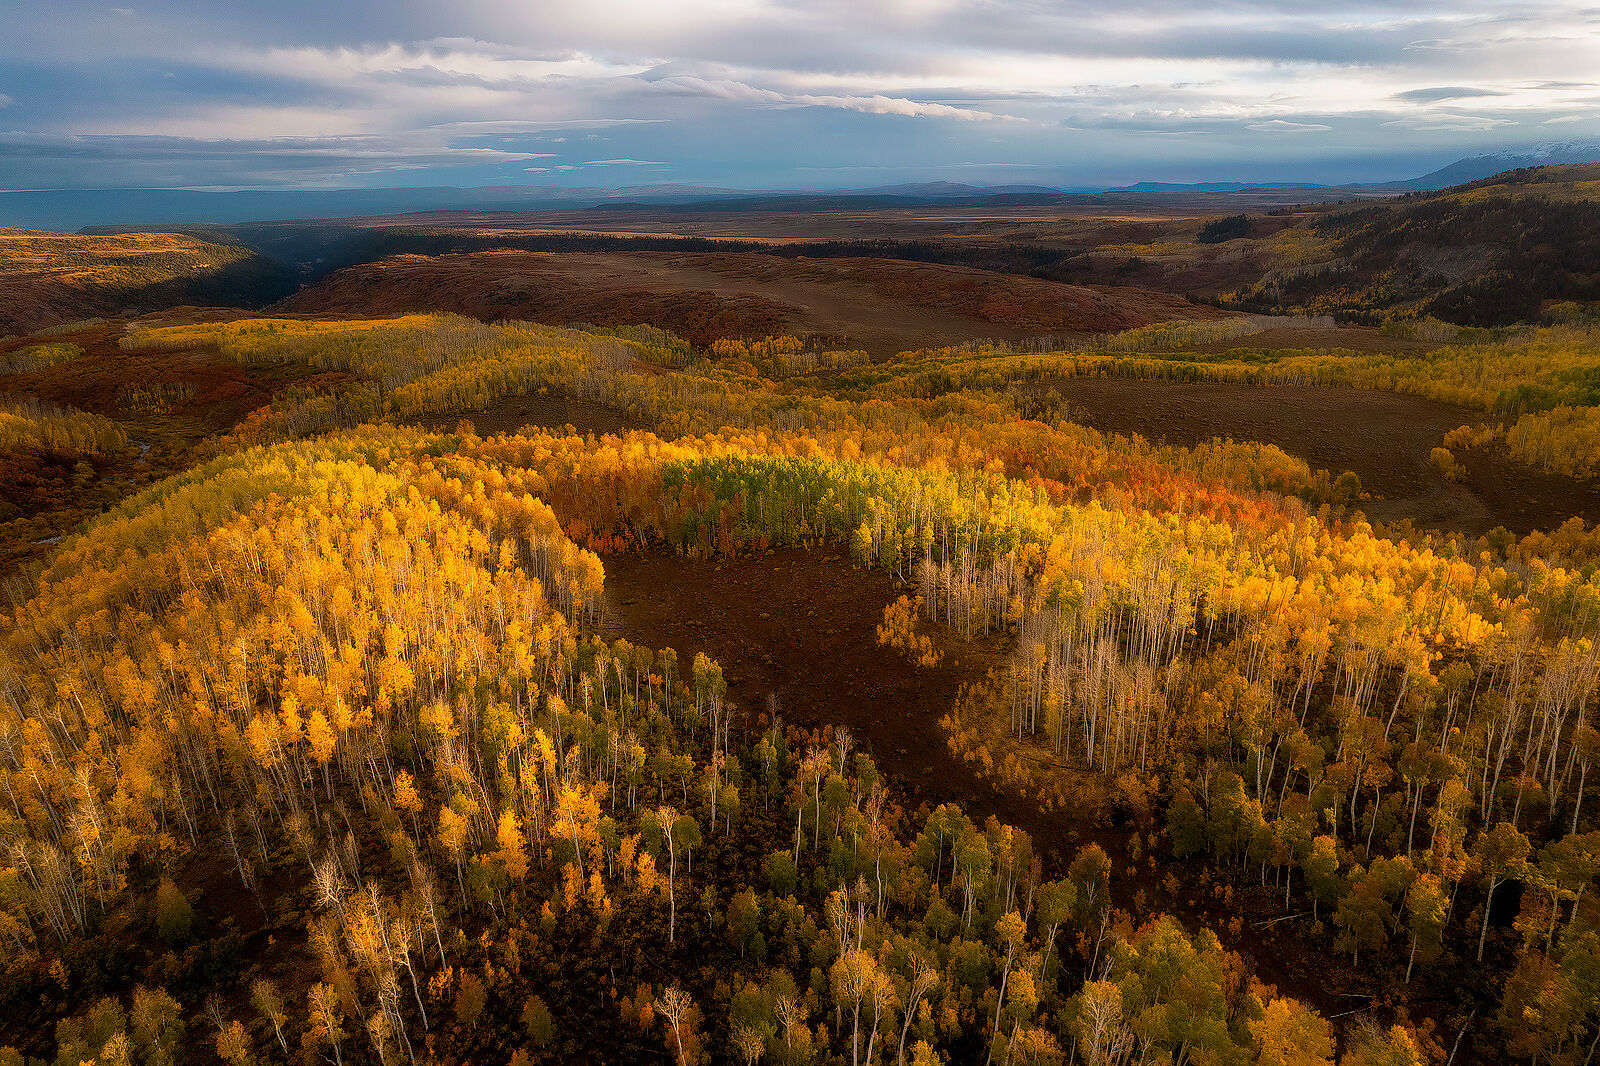 Aerial photography of the sun shining on the vast aspen groves below that sparkle with yellow leaves.